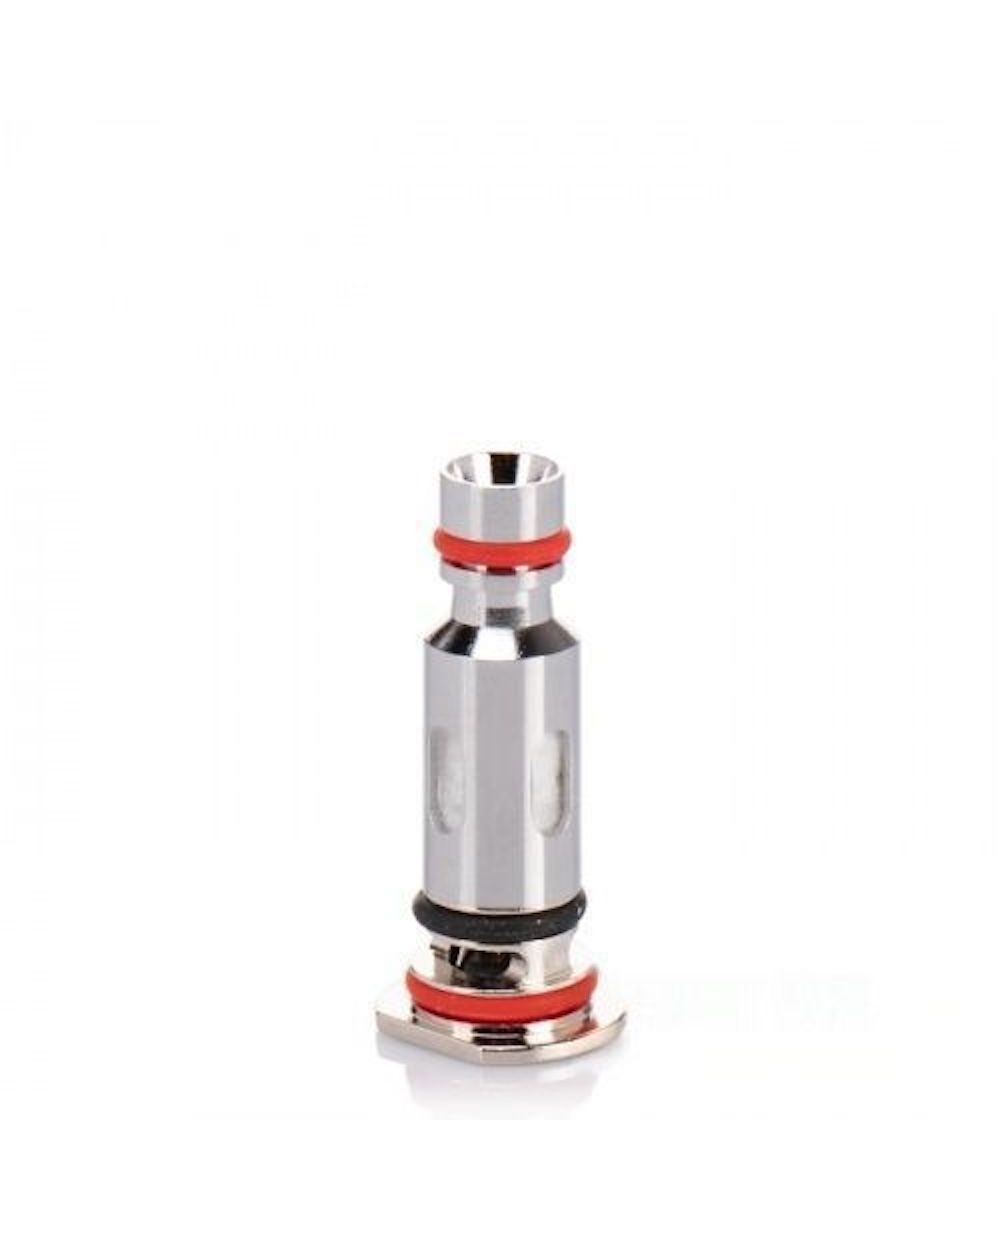 Uwell Caliburn G2 Coils 1.2ohm - 4 Pack by VapeTrend NZ